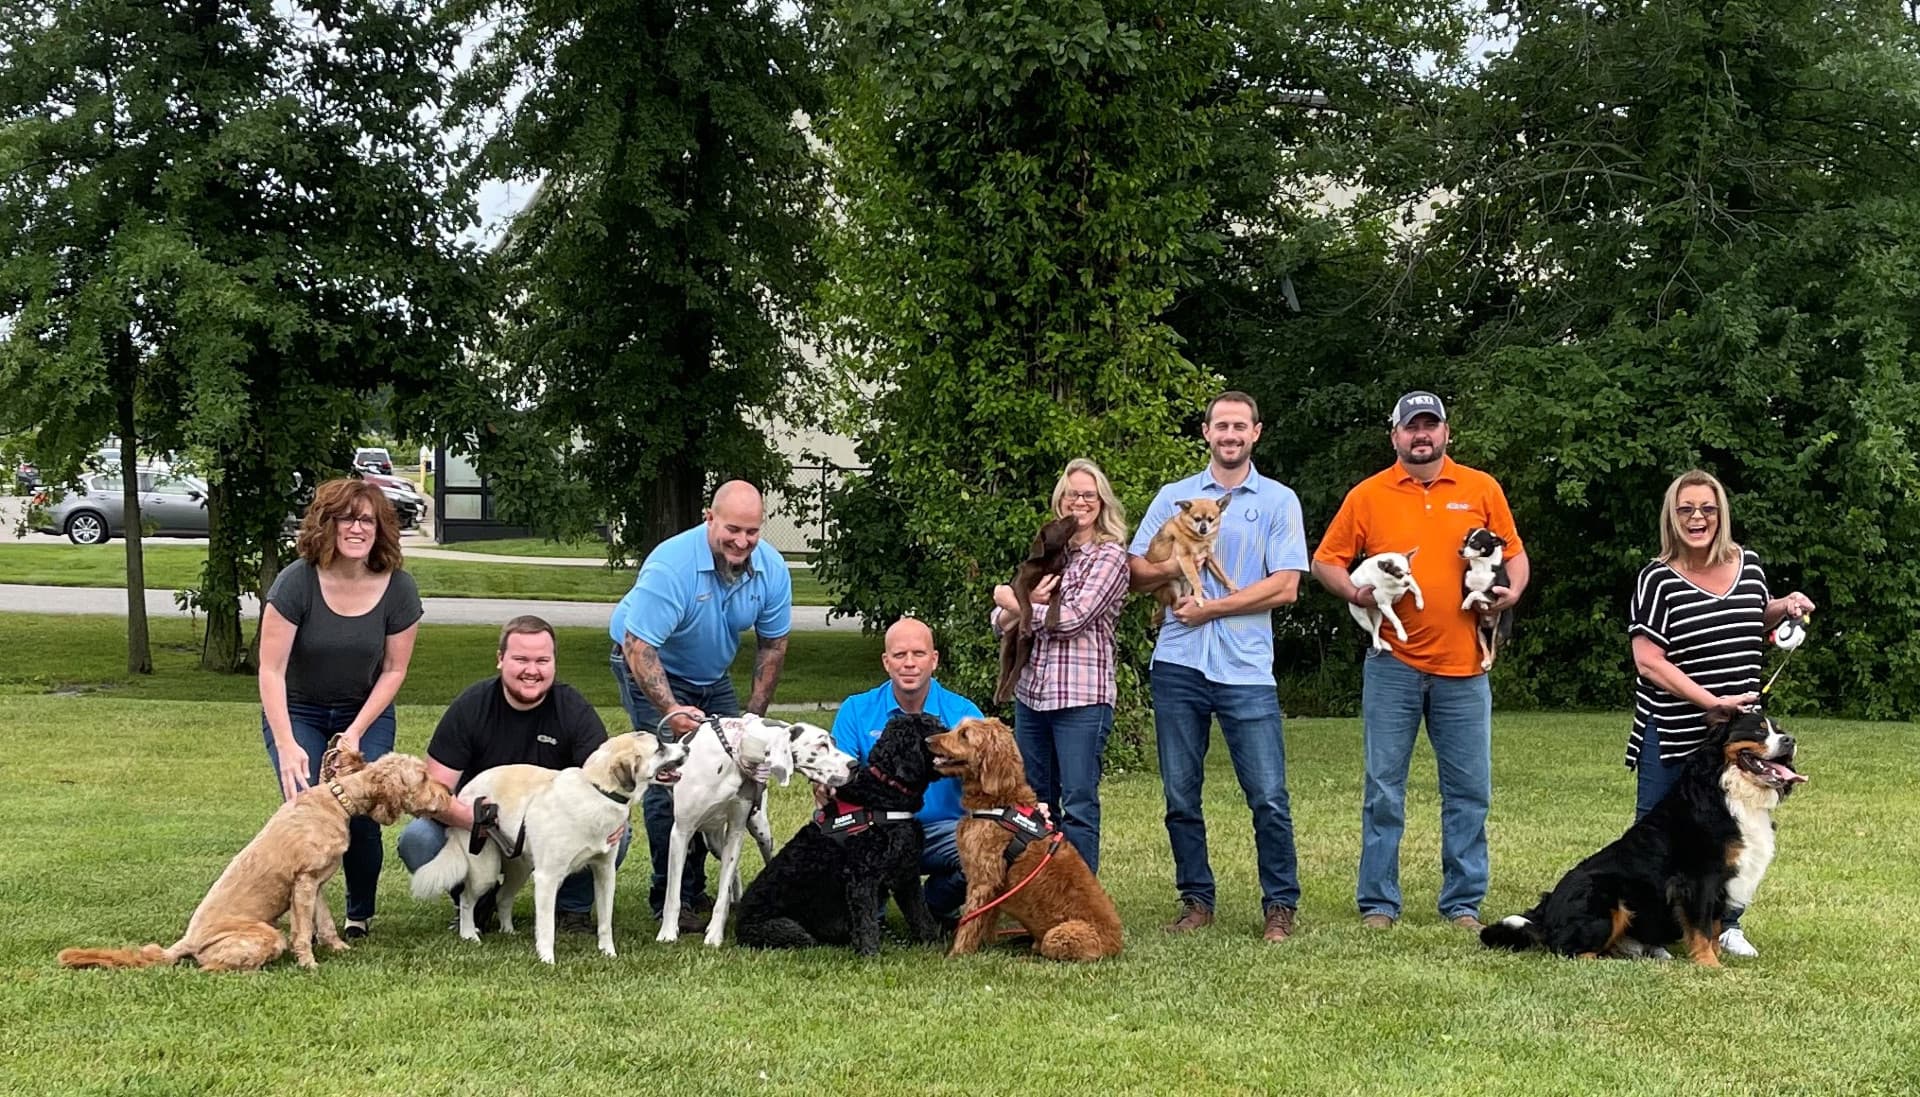 The Commercial Air team with their dogs.